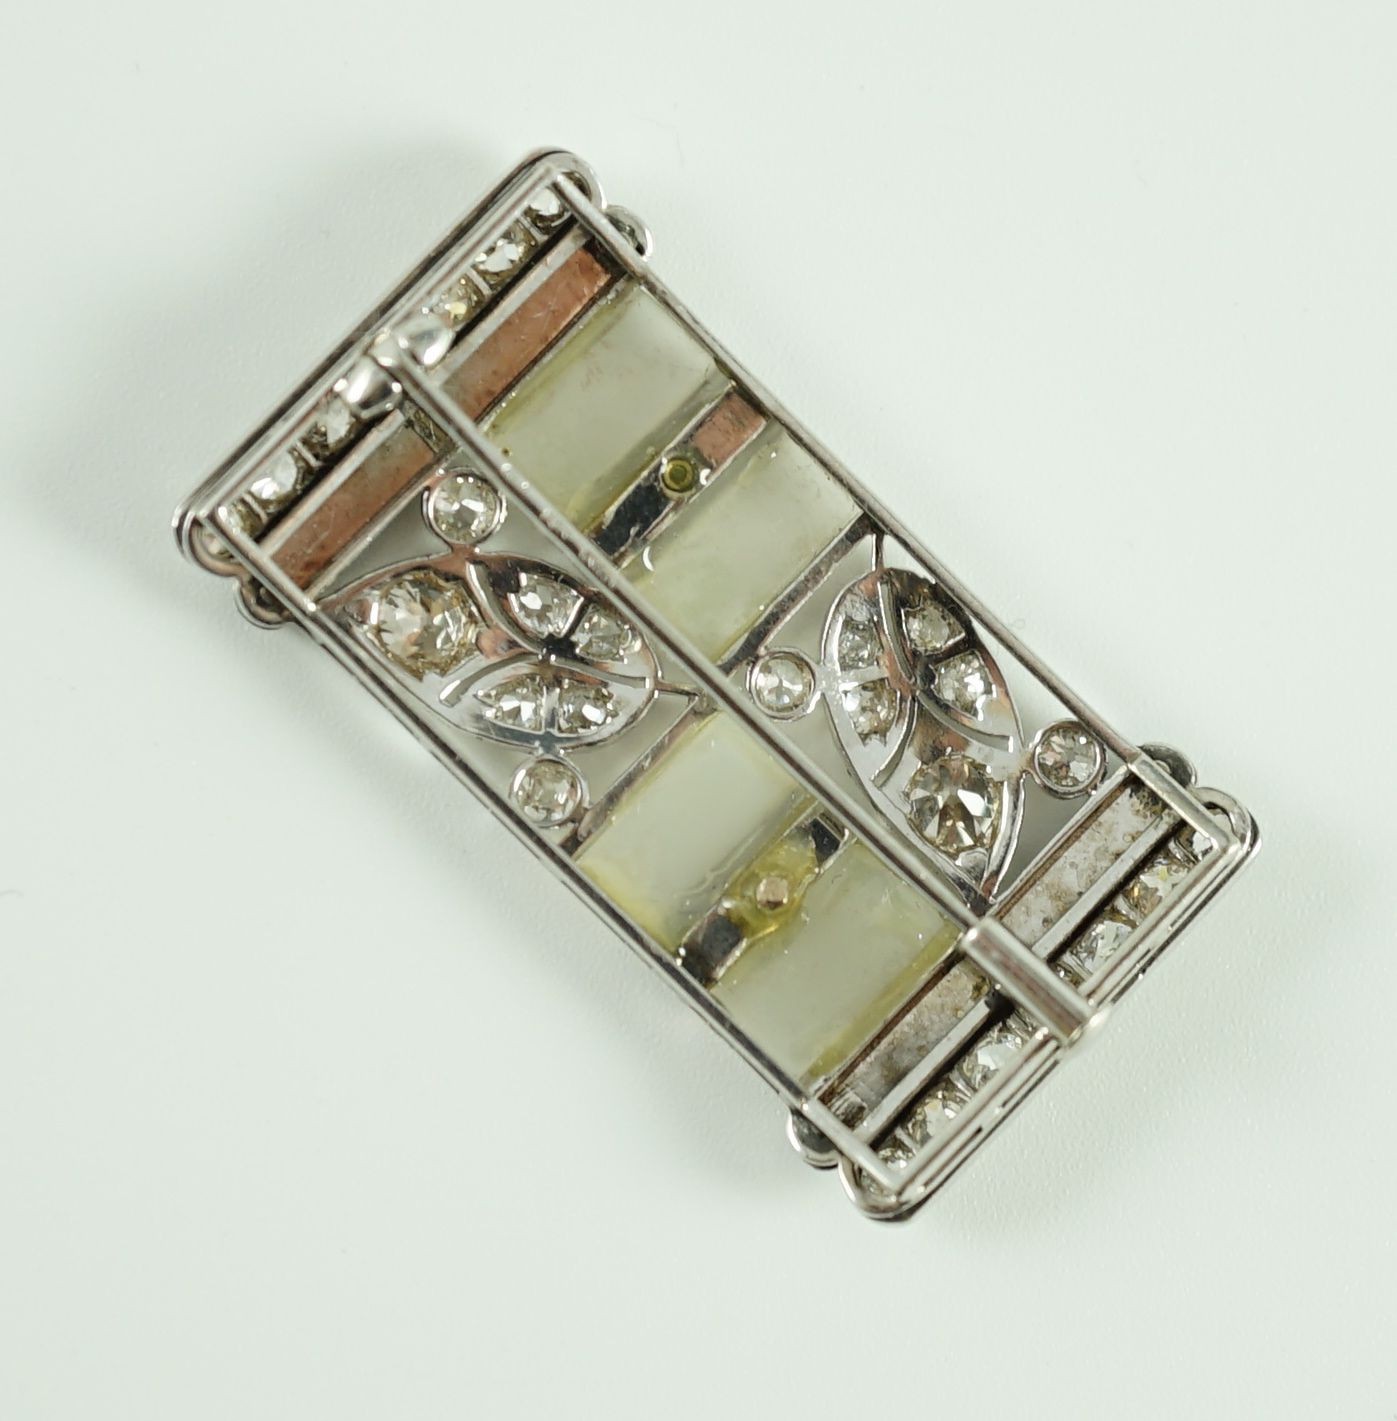 A 1930's/1940's Austro-Hungarian white gold, millegrain set diamond, frosted glass and black enamel rectangular brooch